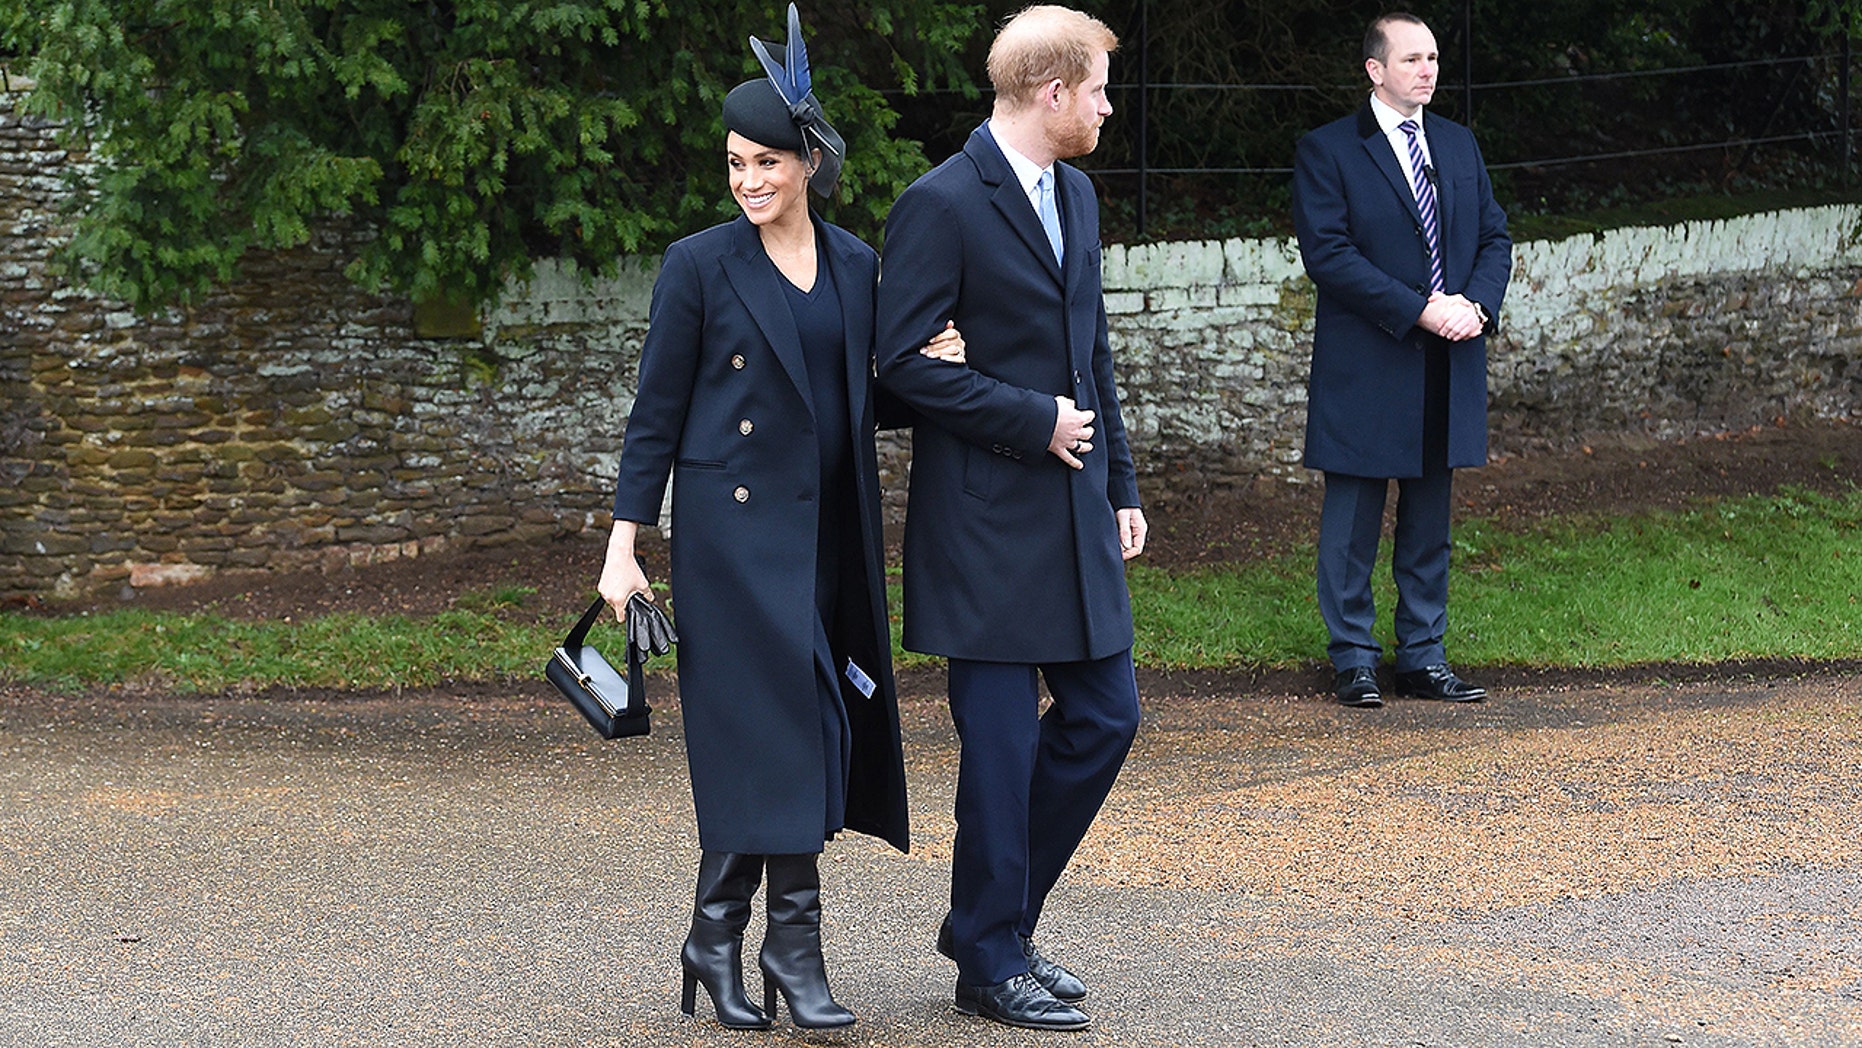 Victoria Beckham had no idea Meghan Markle would wear her clothes for Christmas at Sandringham